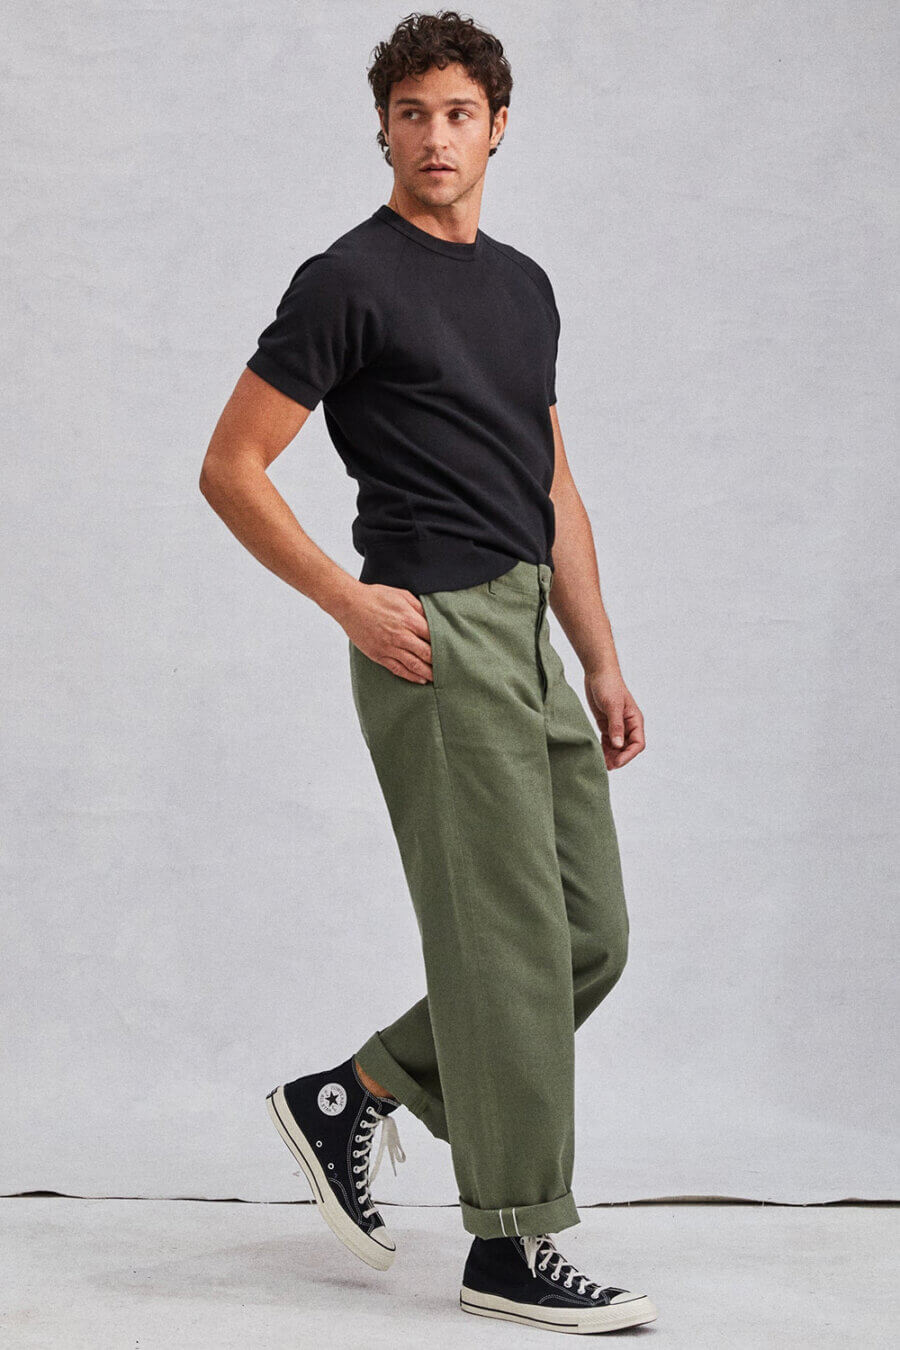 Men's olive green workwear pants with black t-shirt and high tops outfit